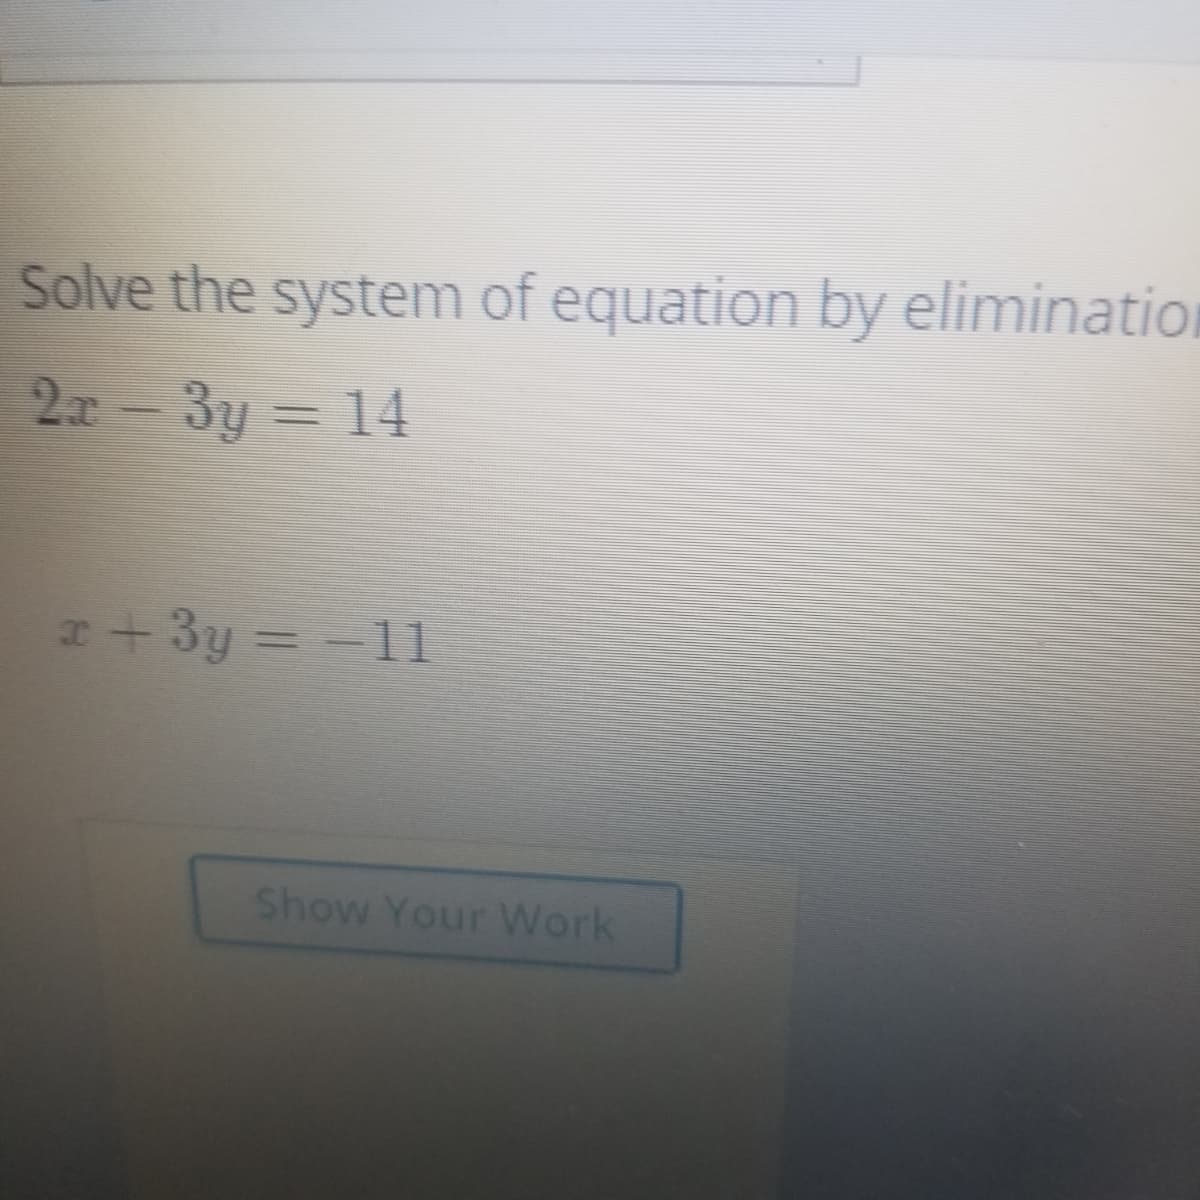 Solve the system of equation by elimination
2x-3y = 14
+3y =-11
Show Your Work
